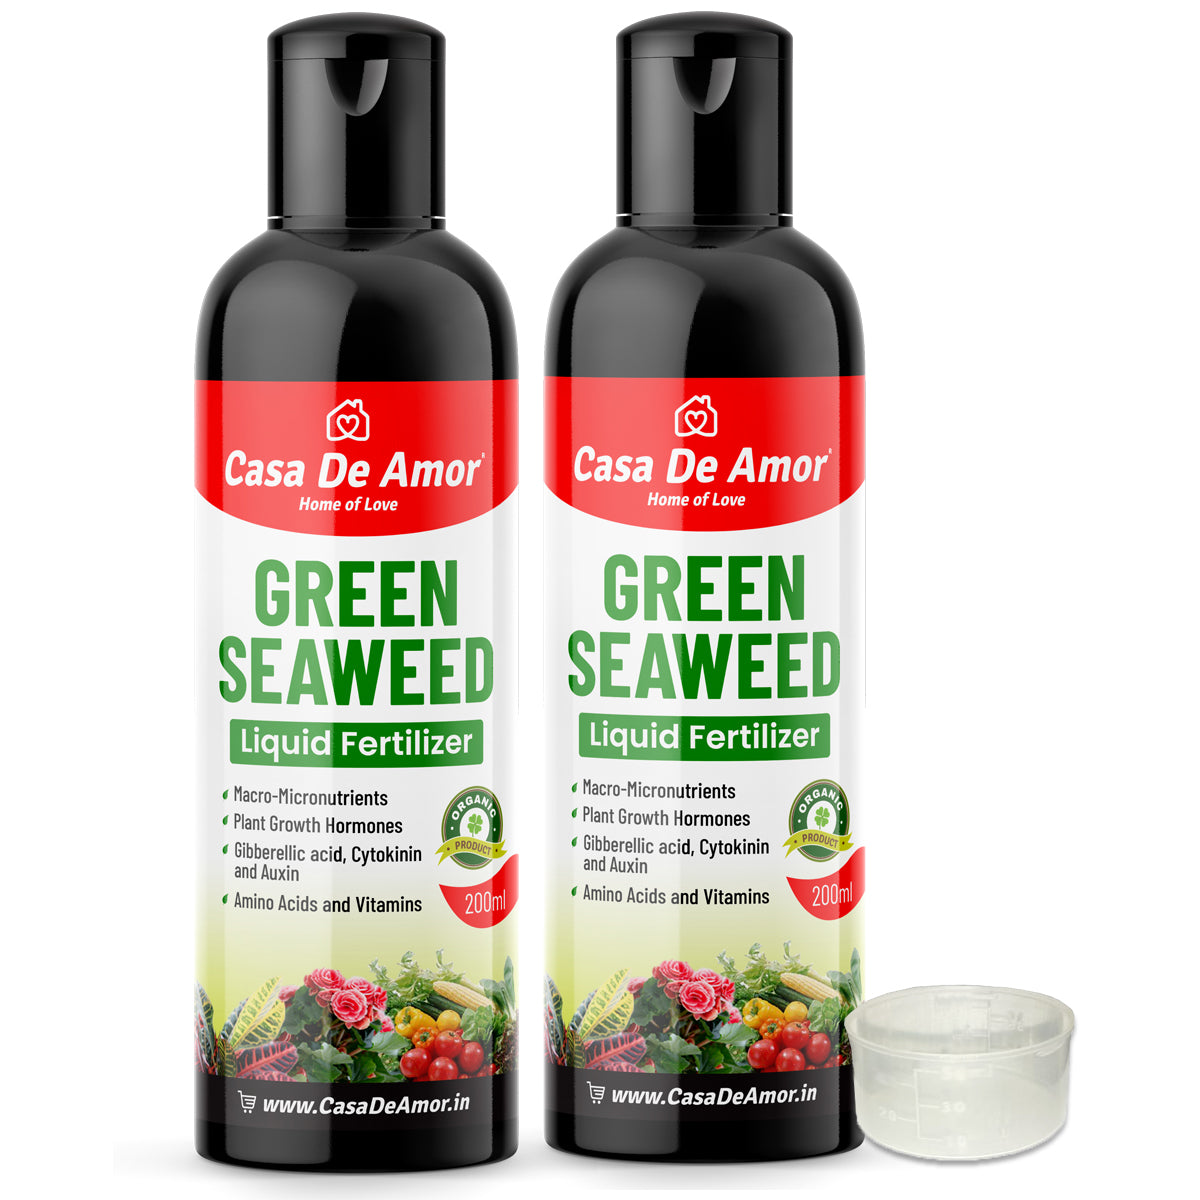 Casa De Amor Natural and Organic Green Seaweed Liquid Fertilizer for Improving Plant Productivity and Soil Quality